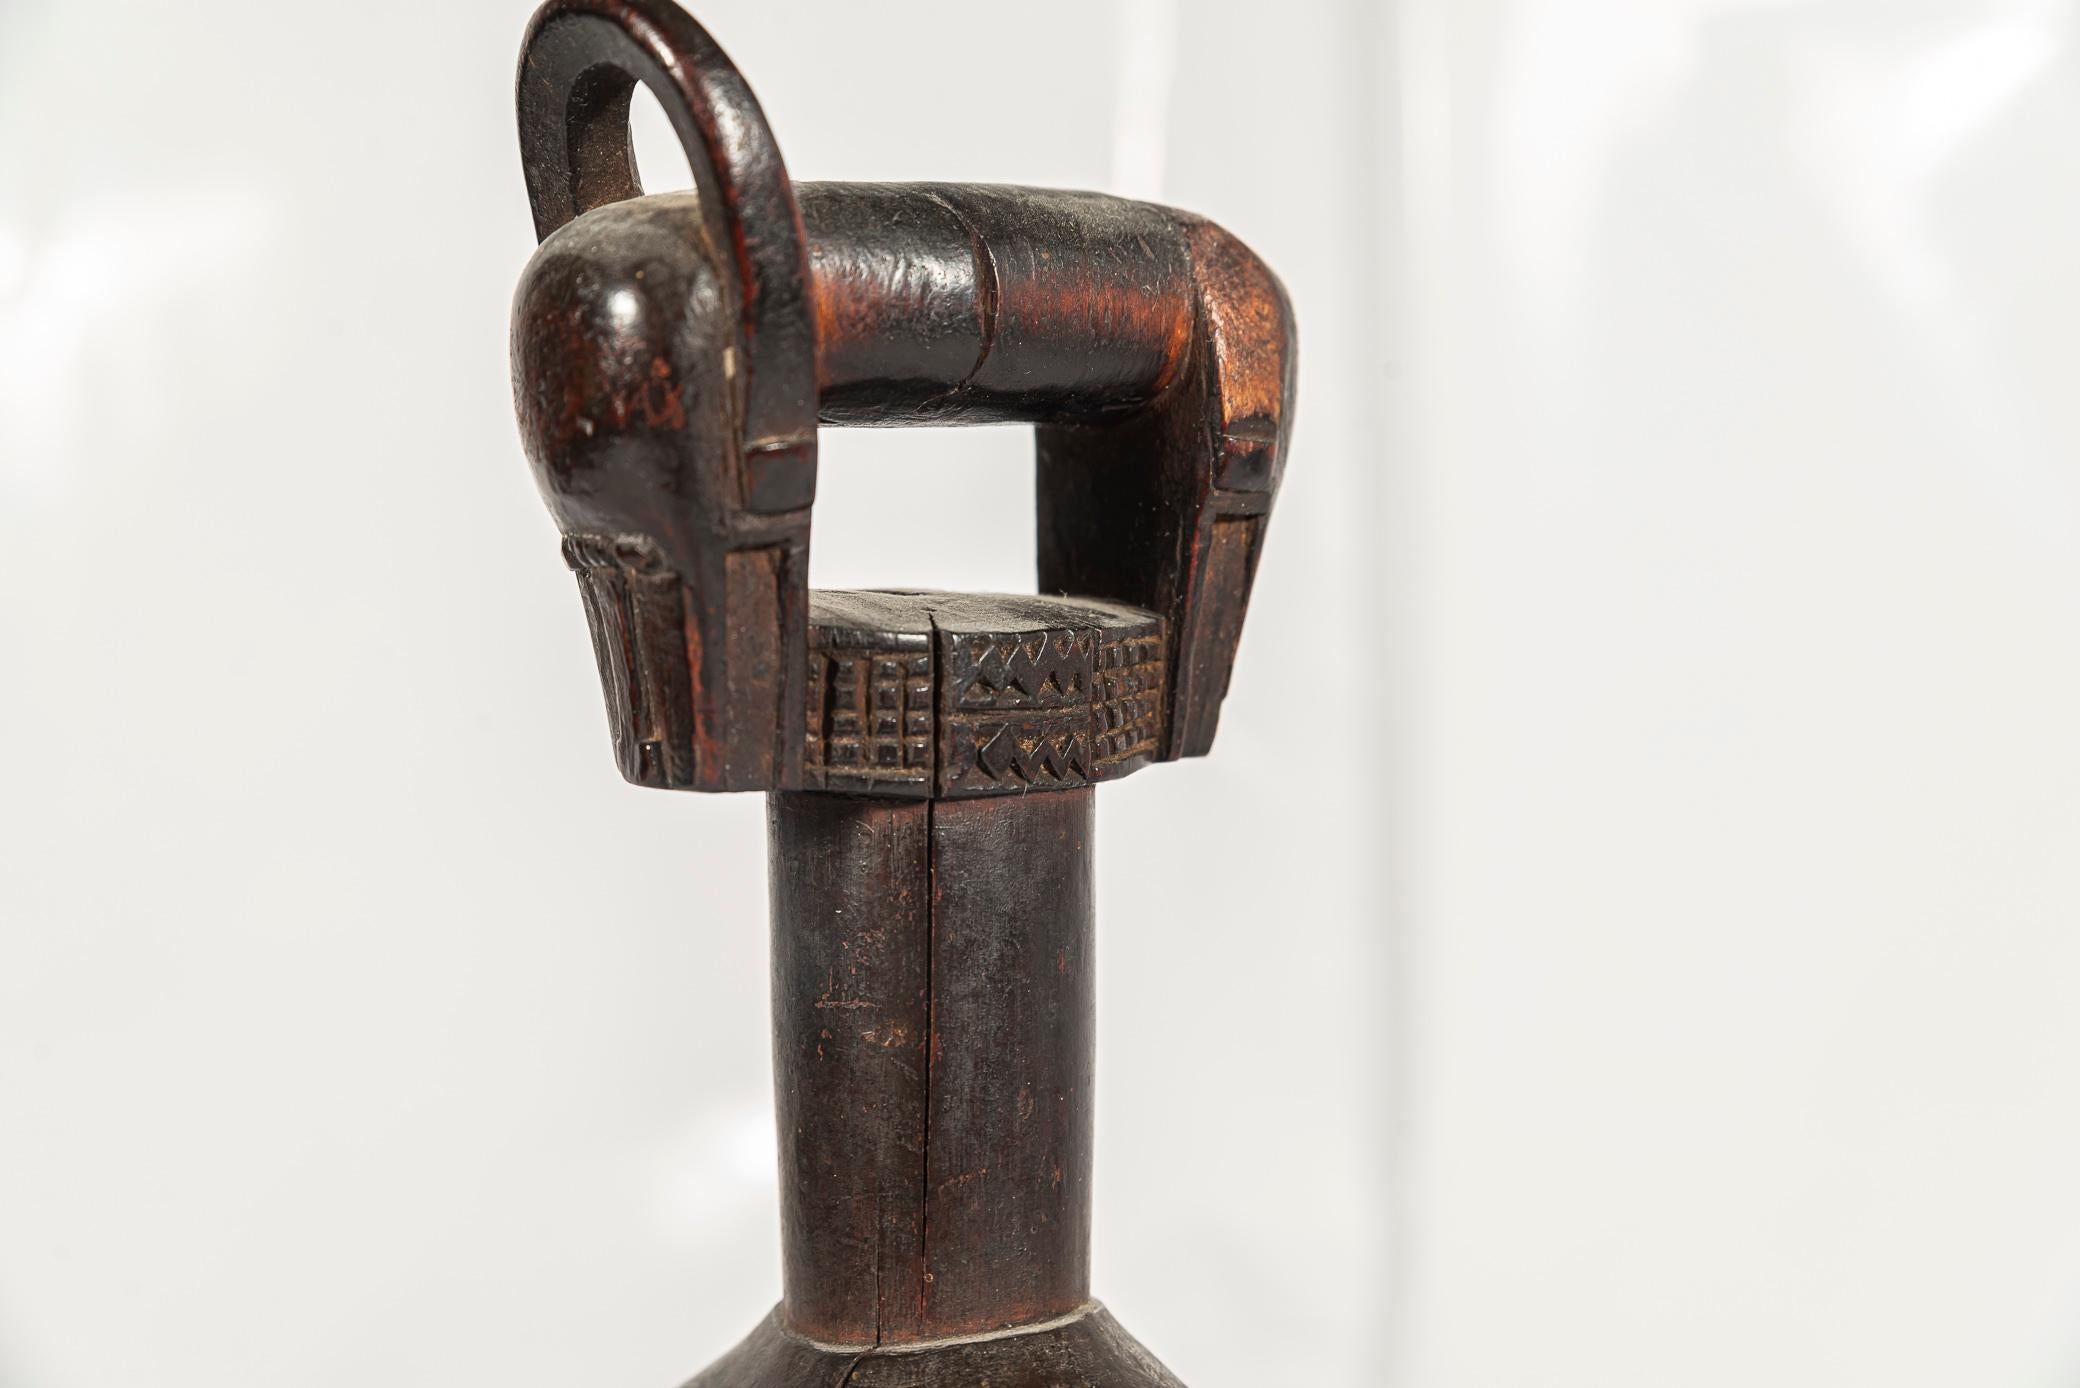 Double Baoule Weaving Pulley, Ivory Coast, Early 20th Century 4